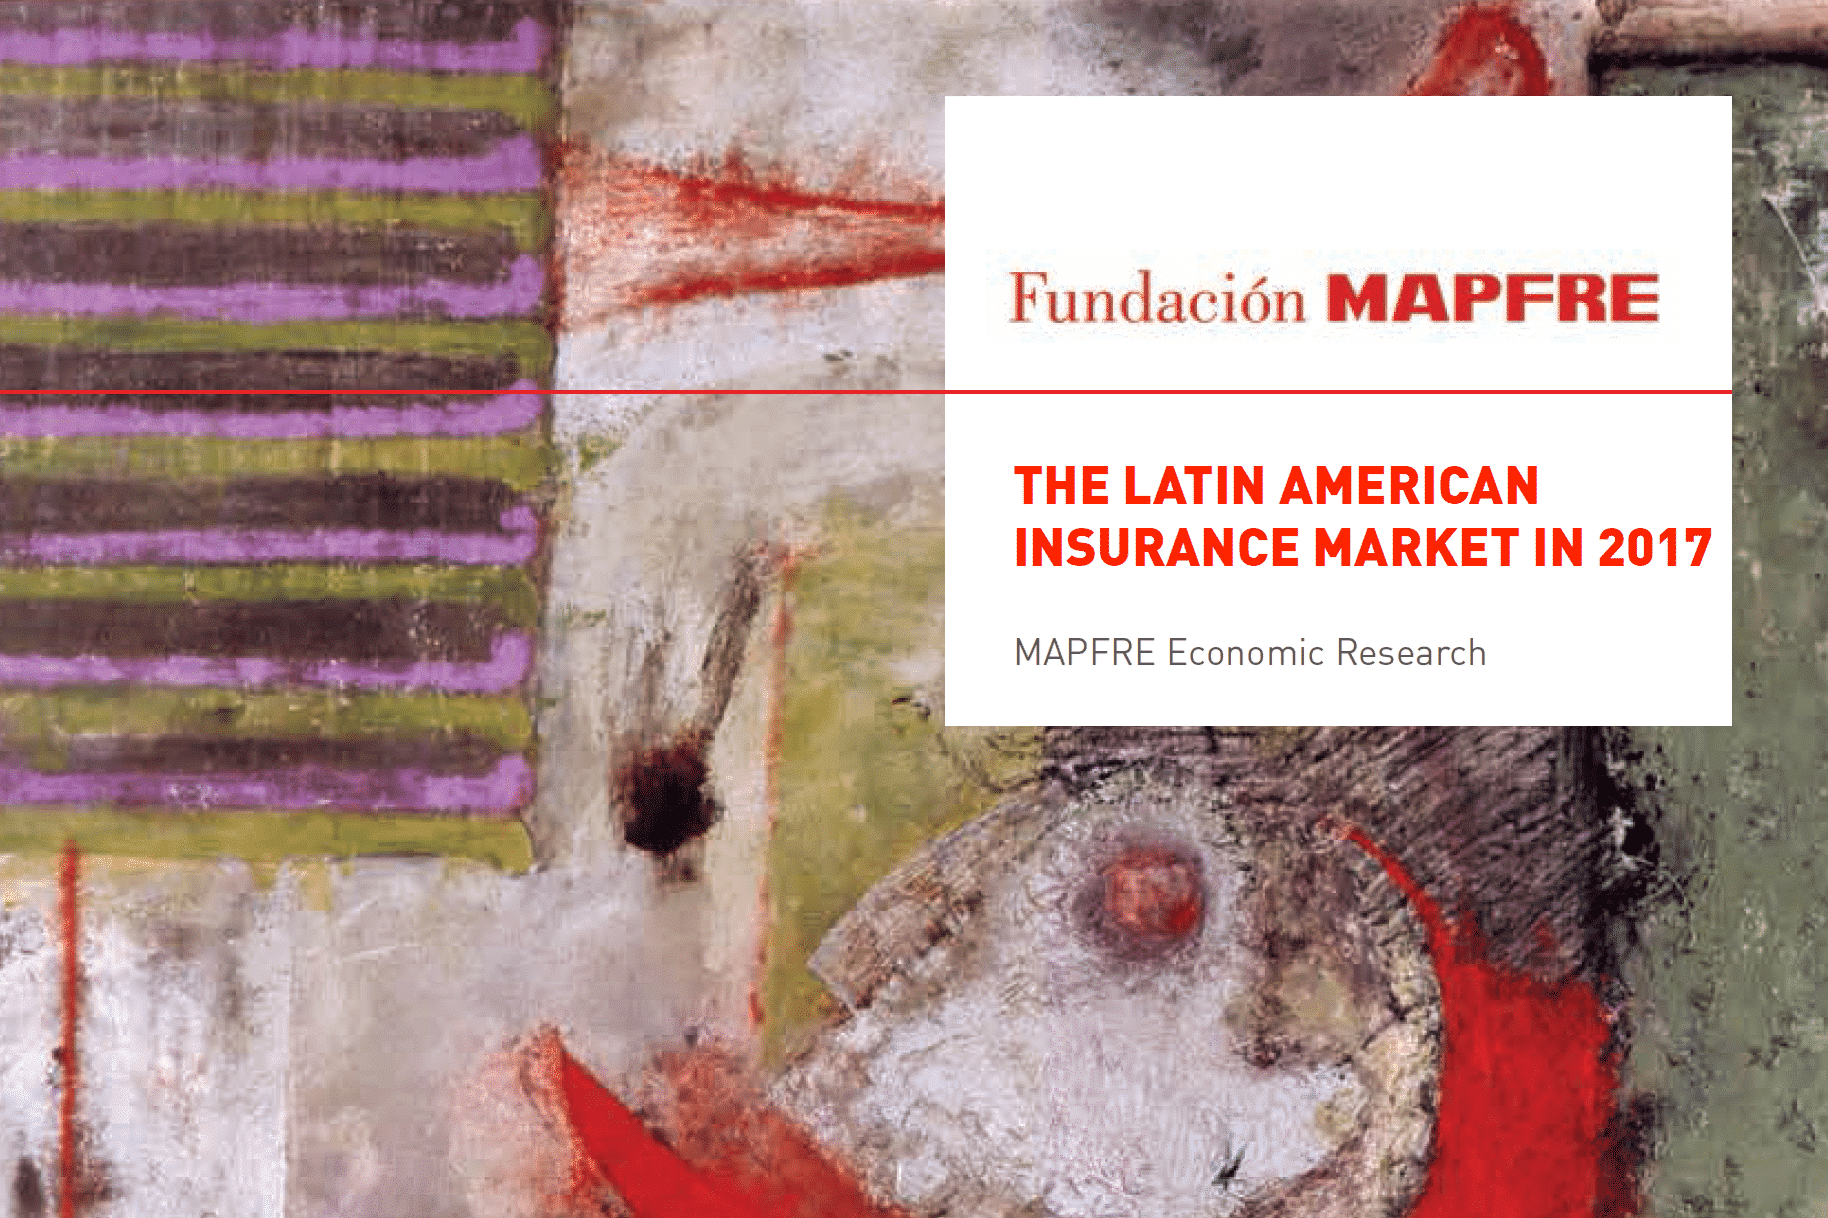 The Latin American Insurance Market in 2017